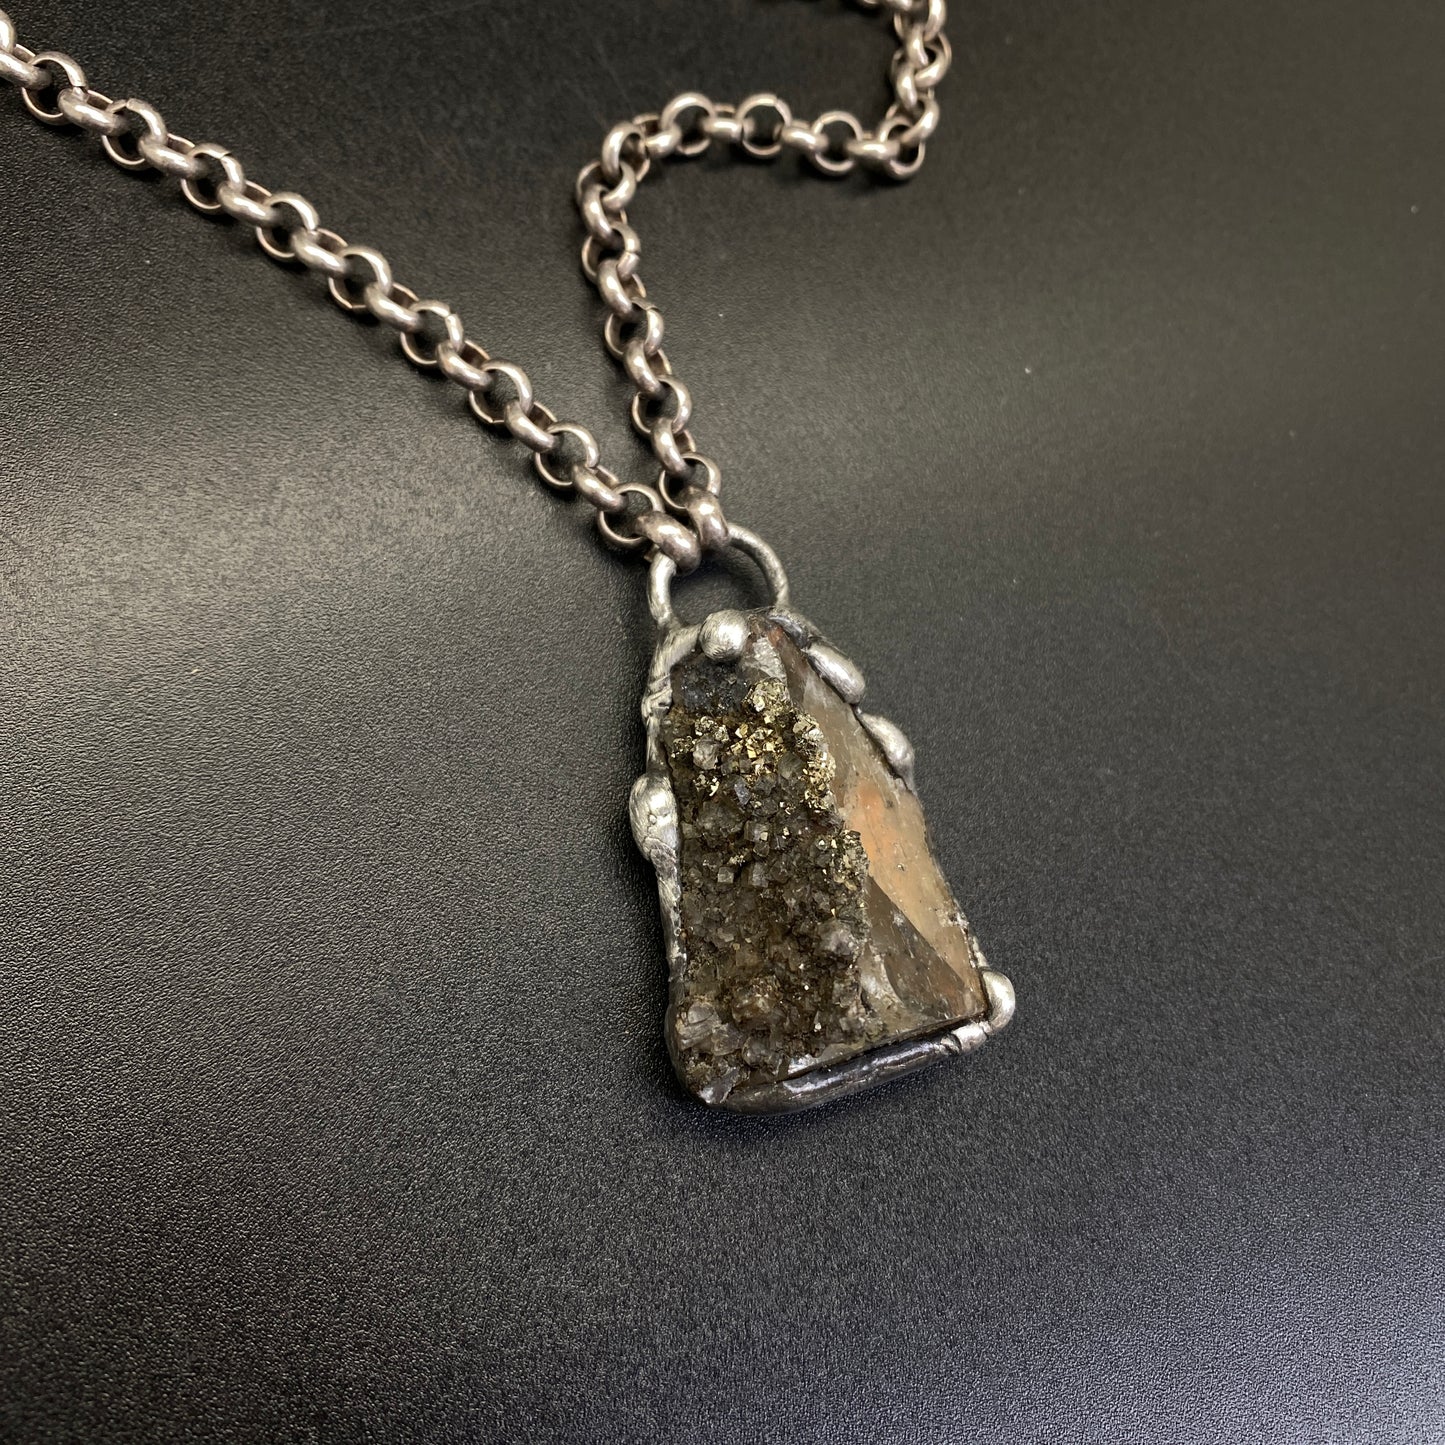 Facet ~ Small Fluorite Necklace With Pyrite